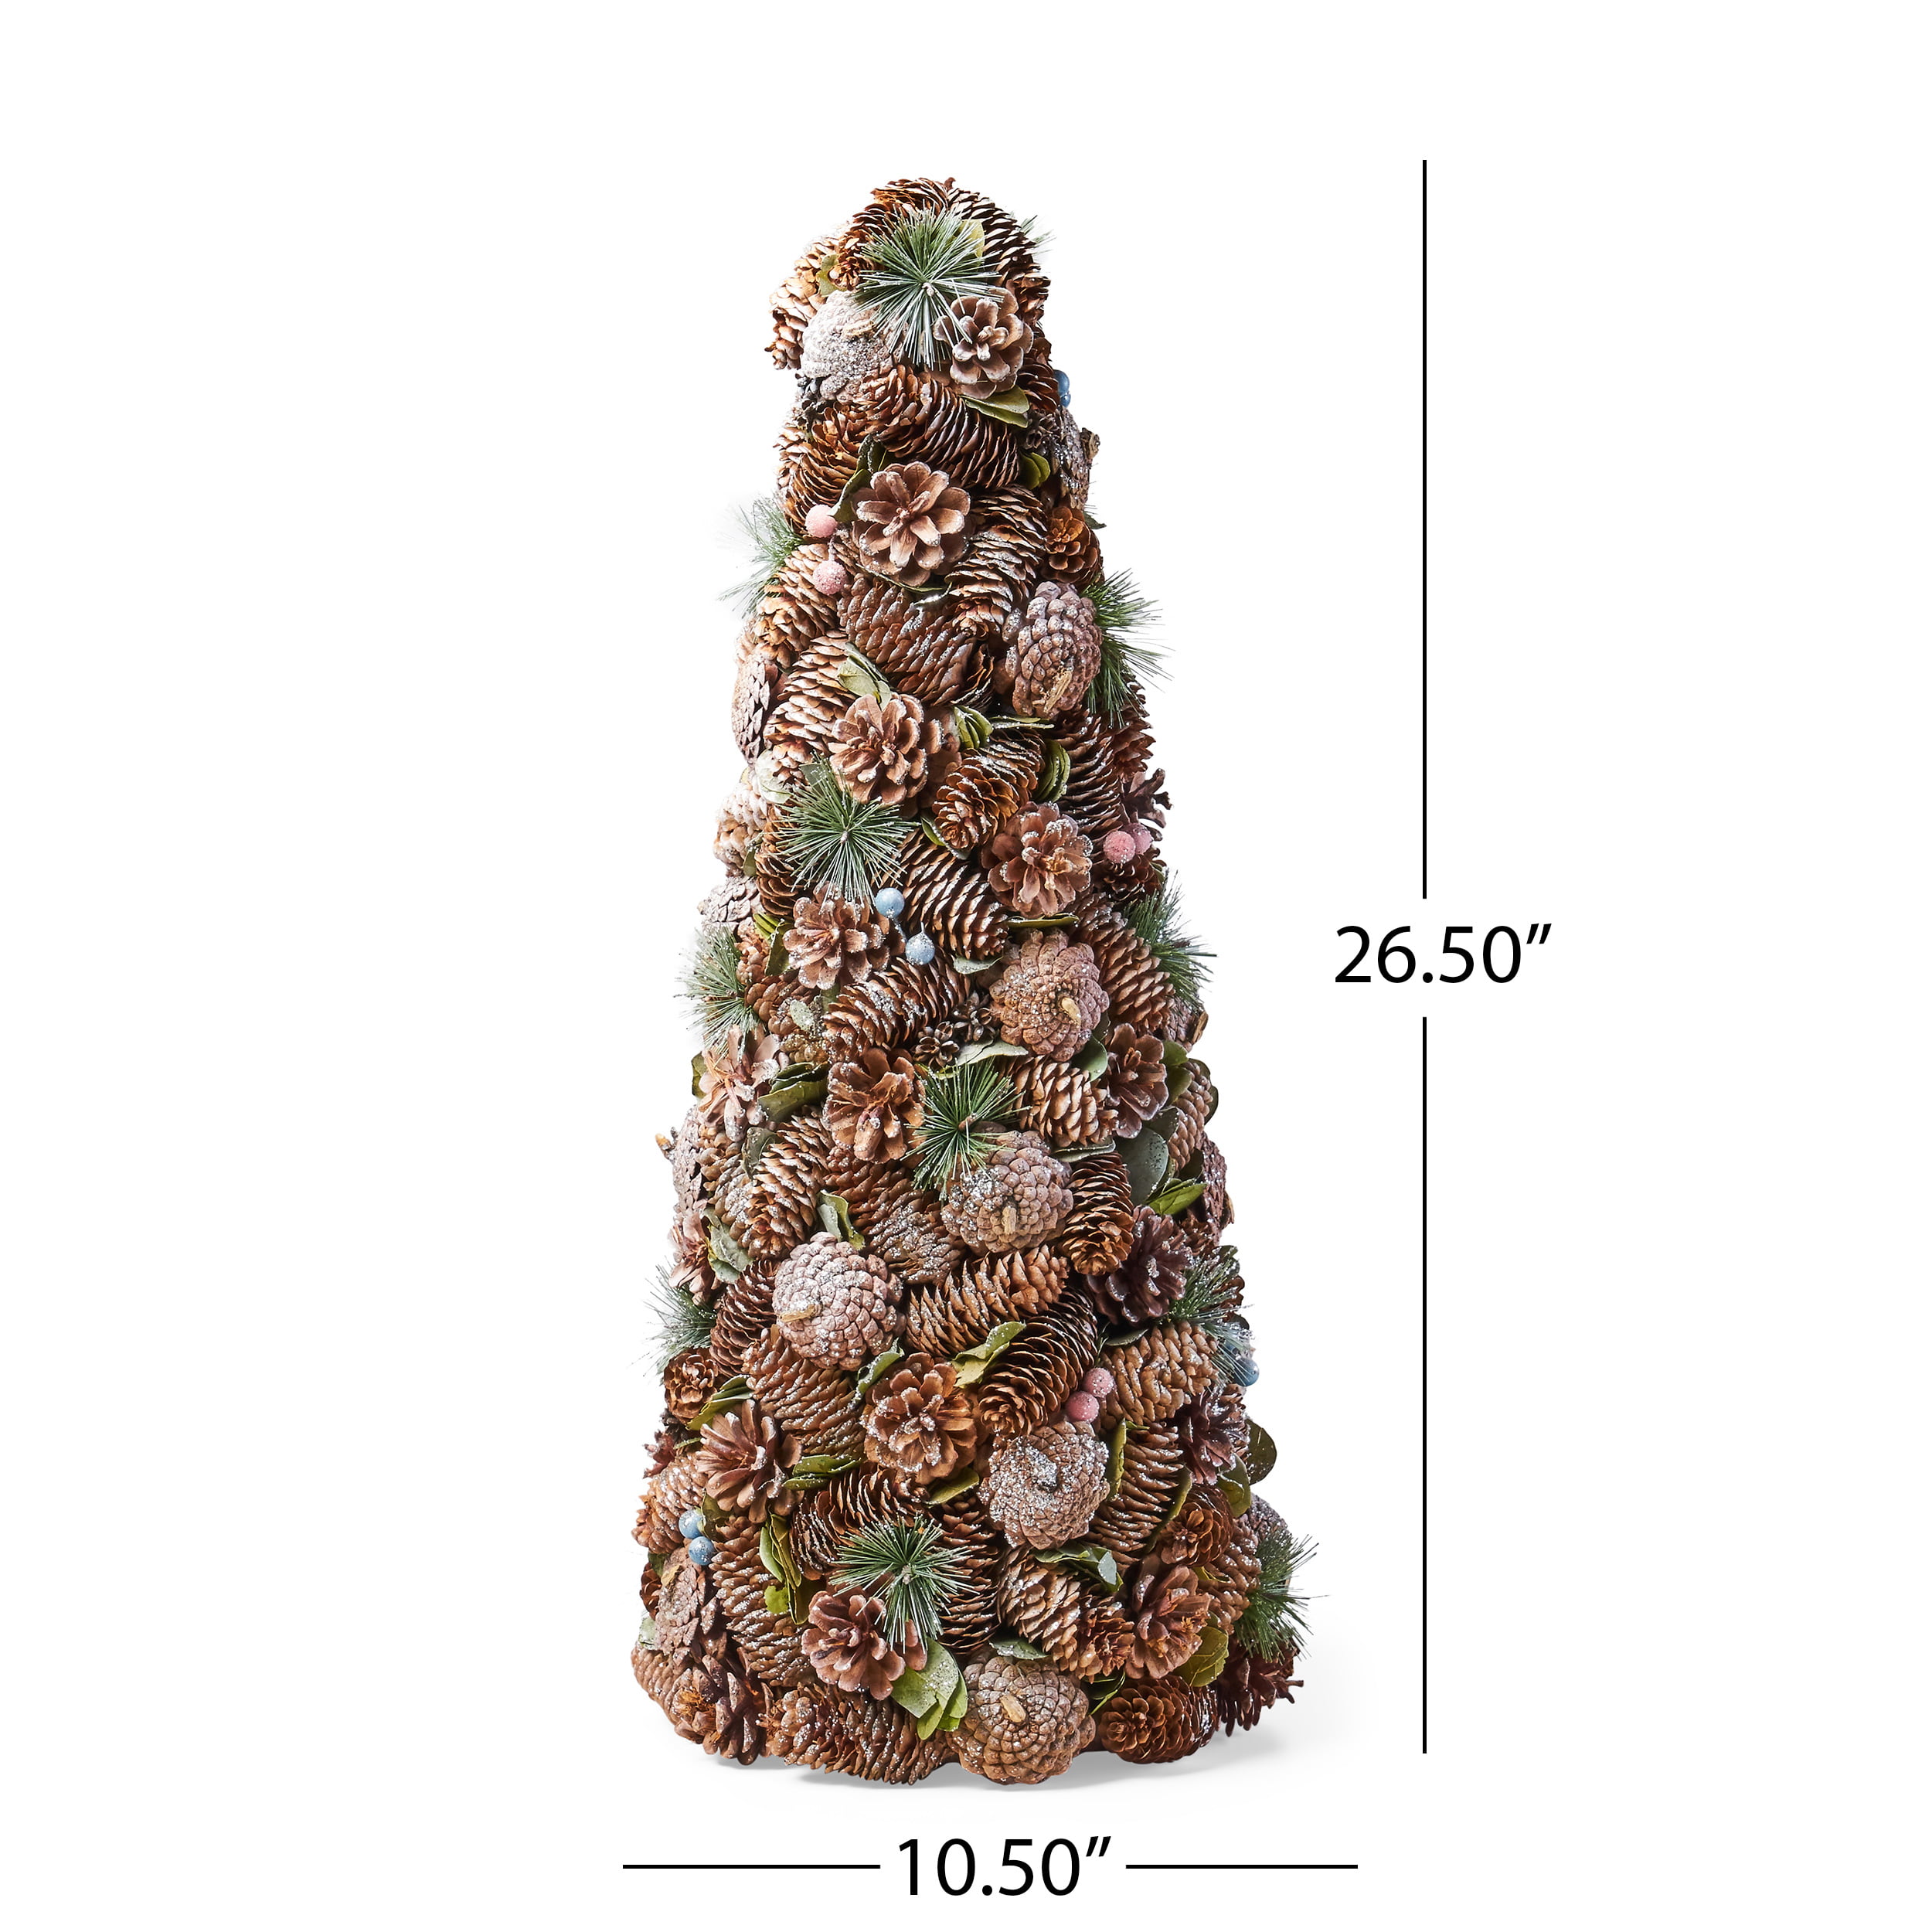 The double life of pine cones: from forest floor to Christmas decor